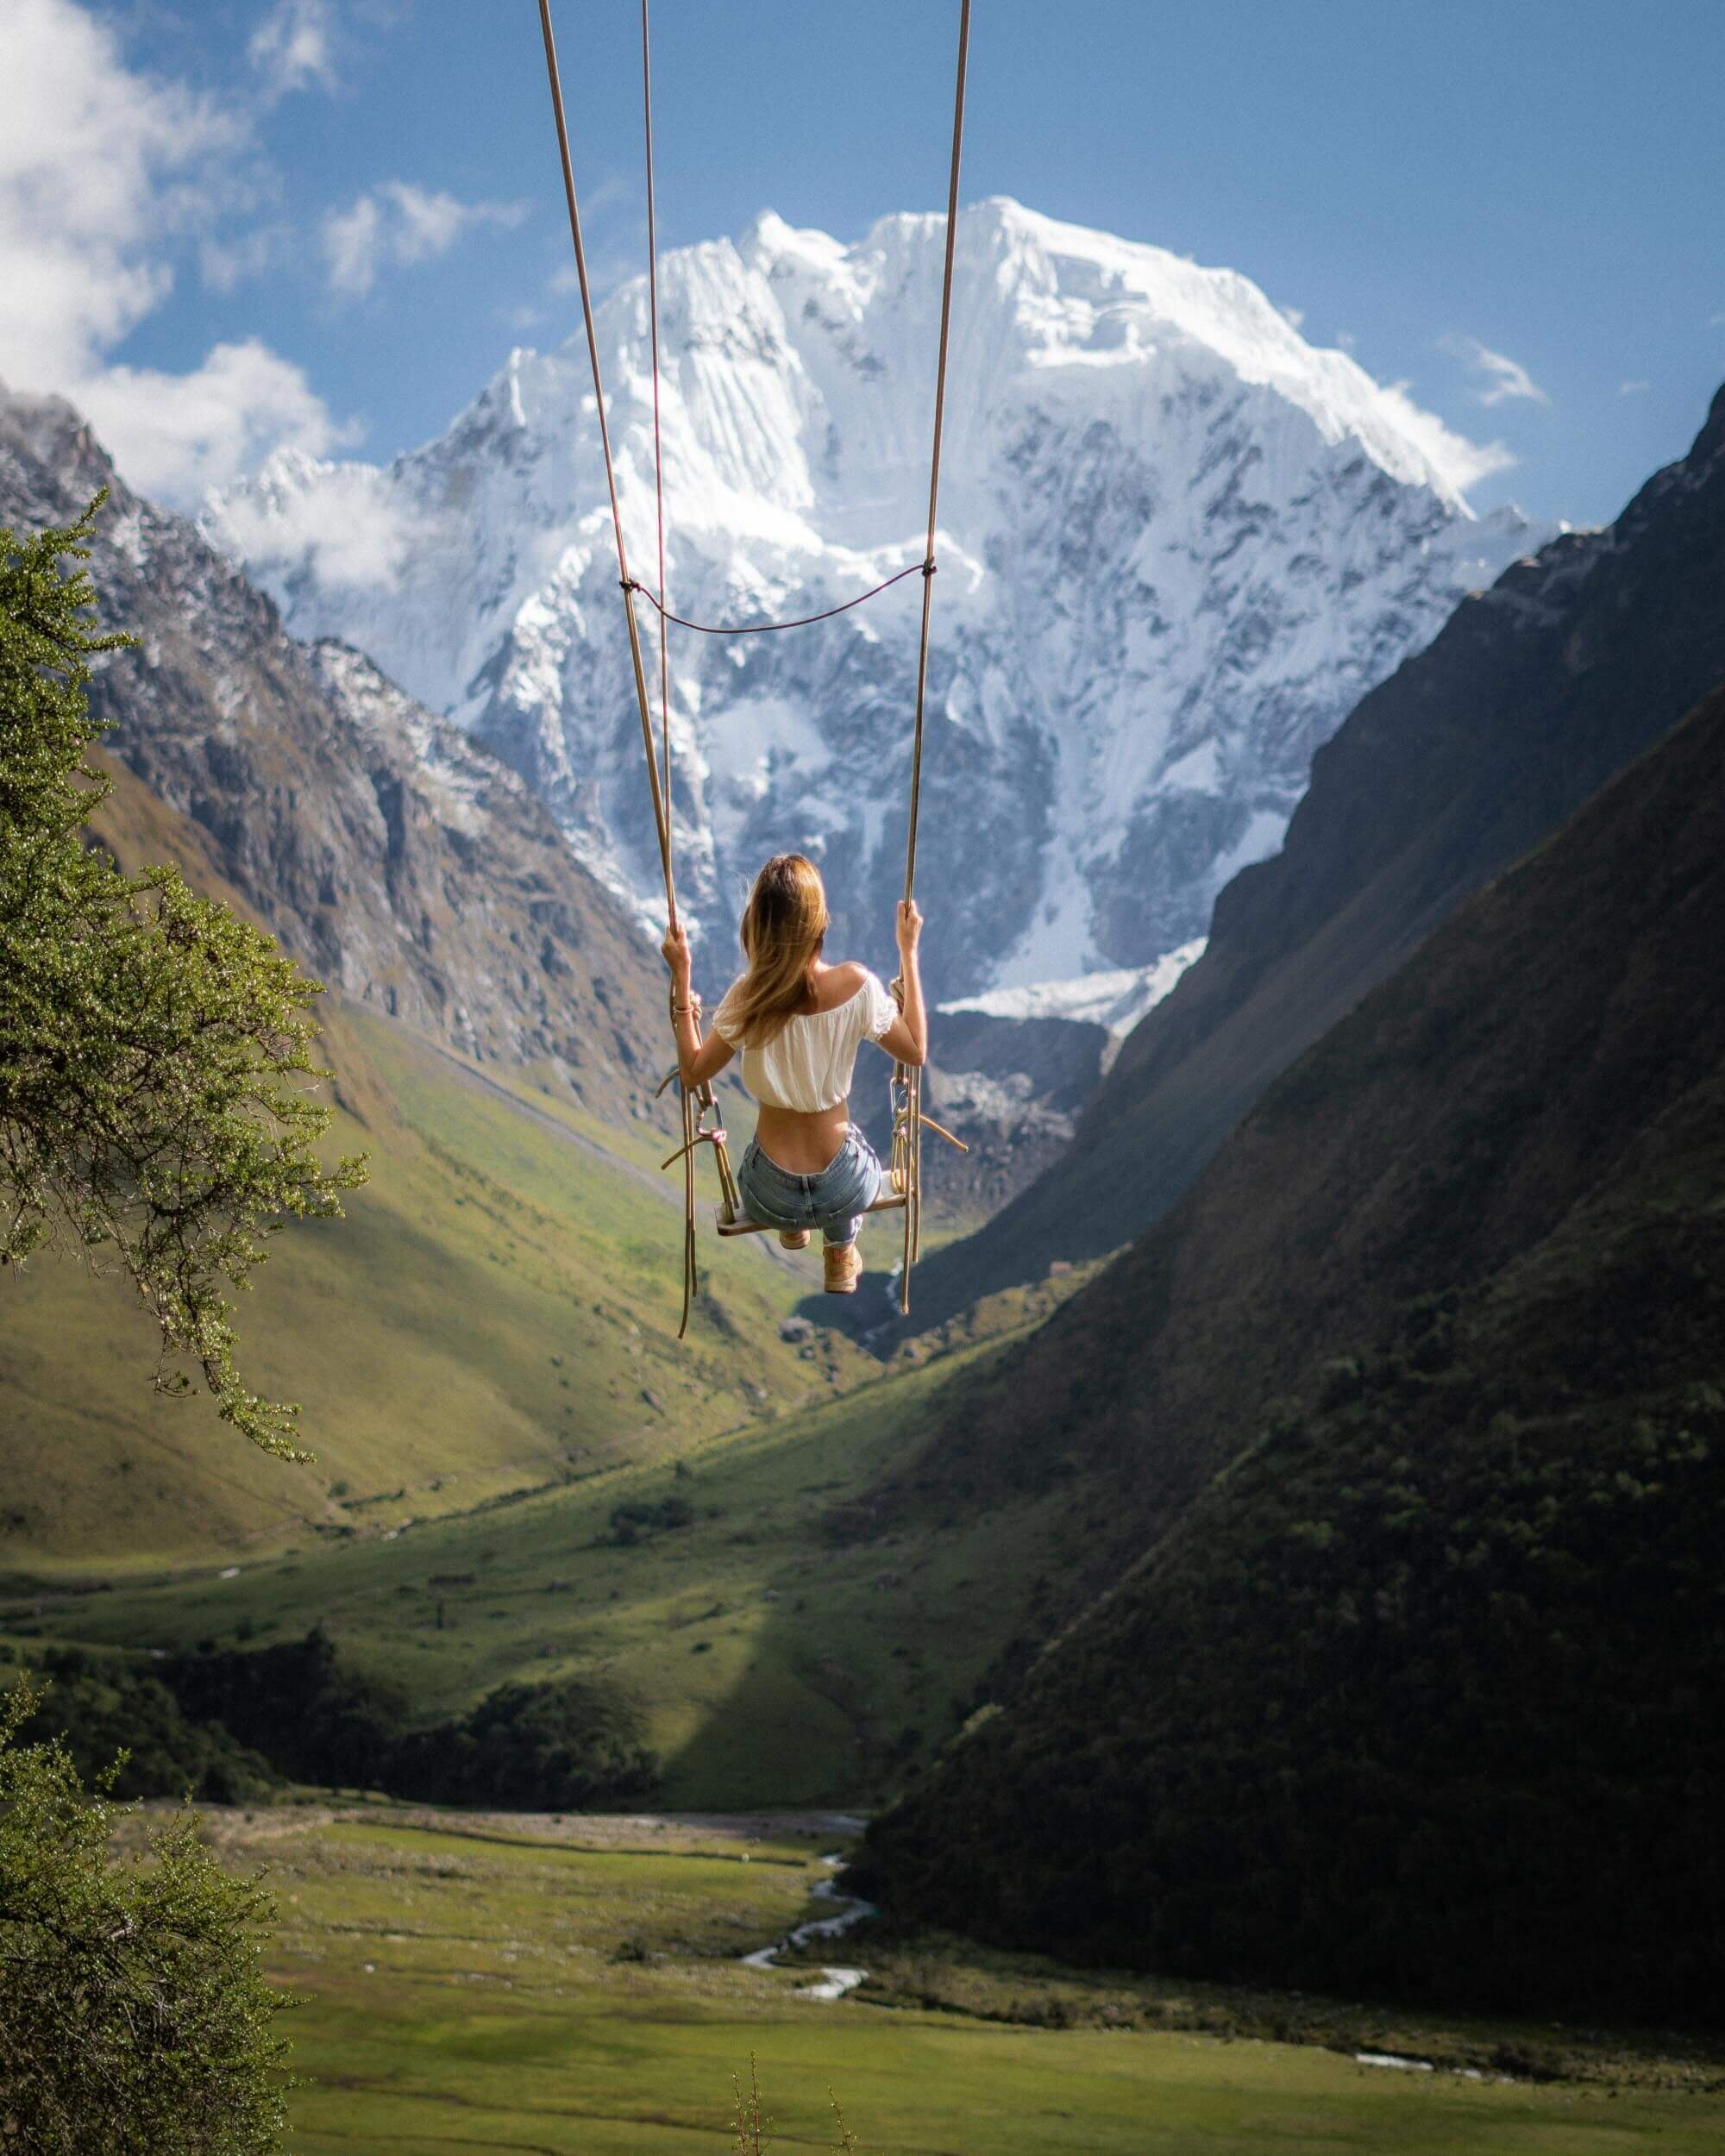 Extreme swinging at one of the hotels in the small village located in the valley below Humantay Lake.